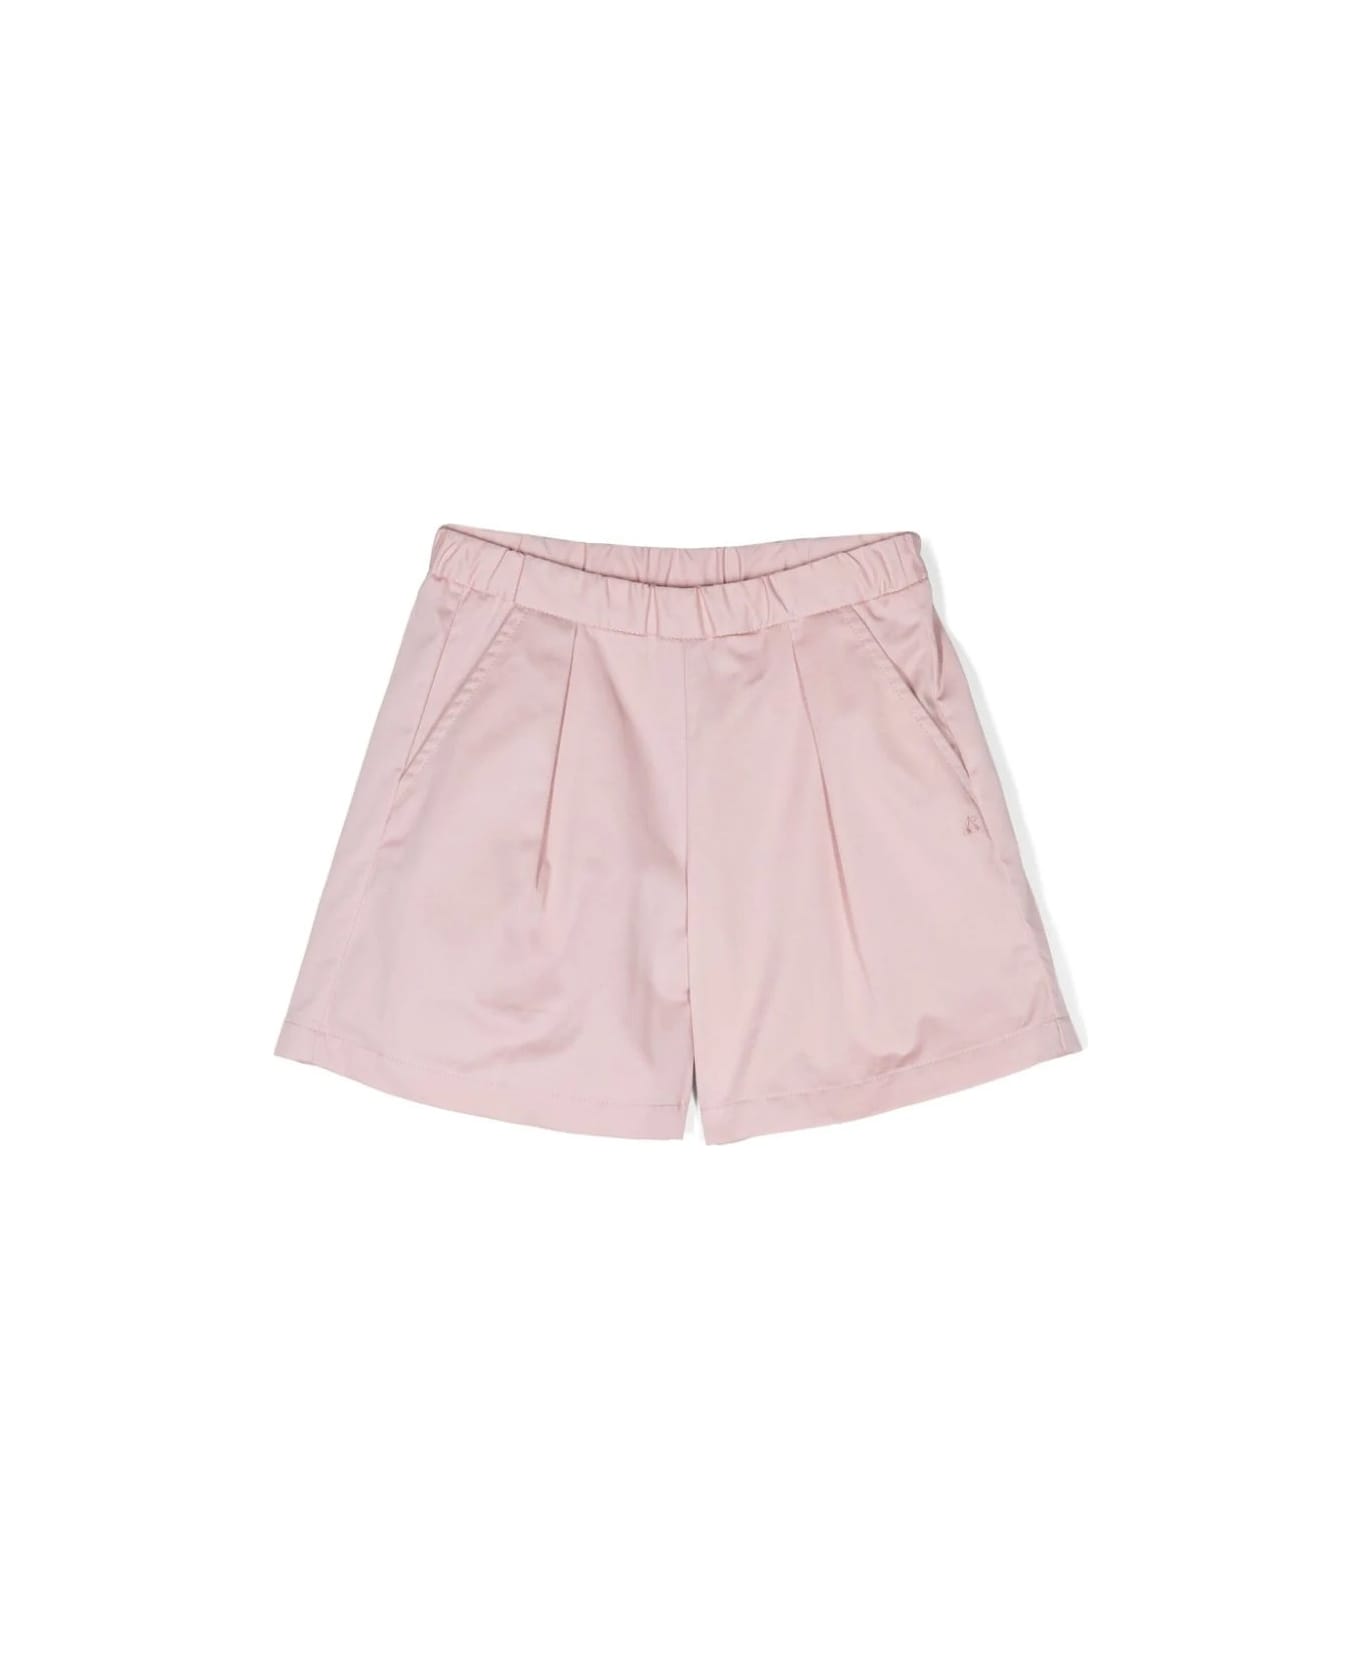 Bonpoint Faded Pink Courtney Shorts - Pink ボトムス